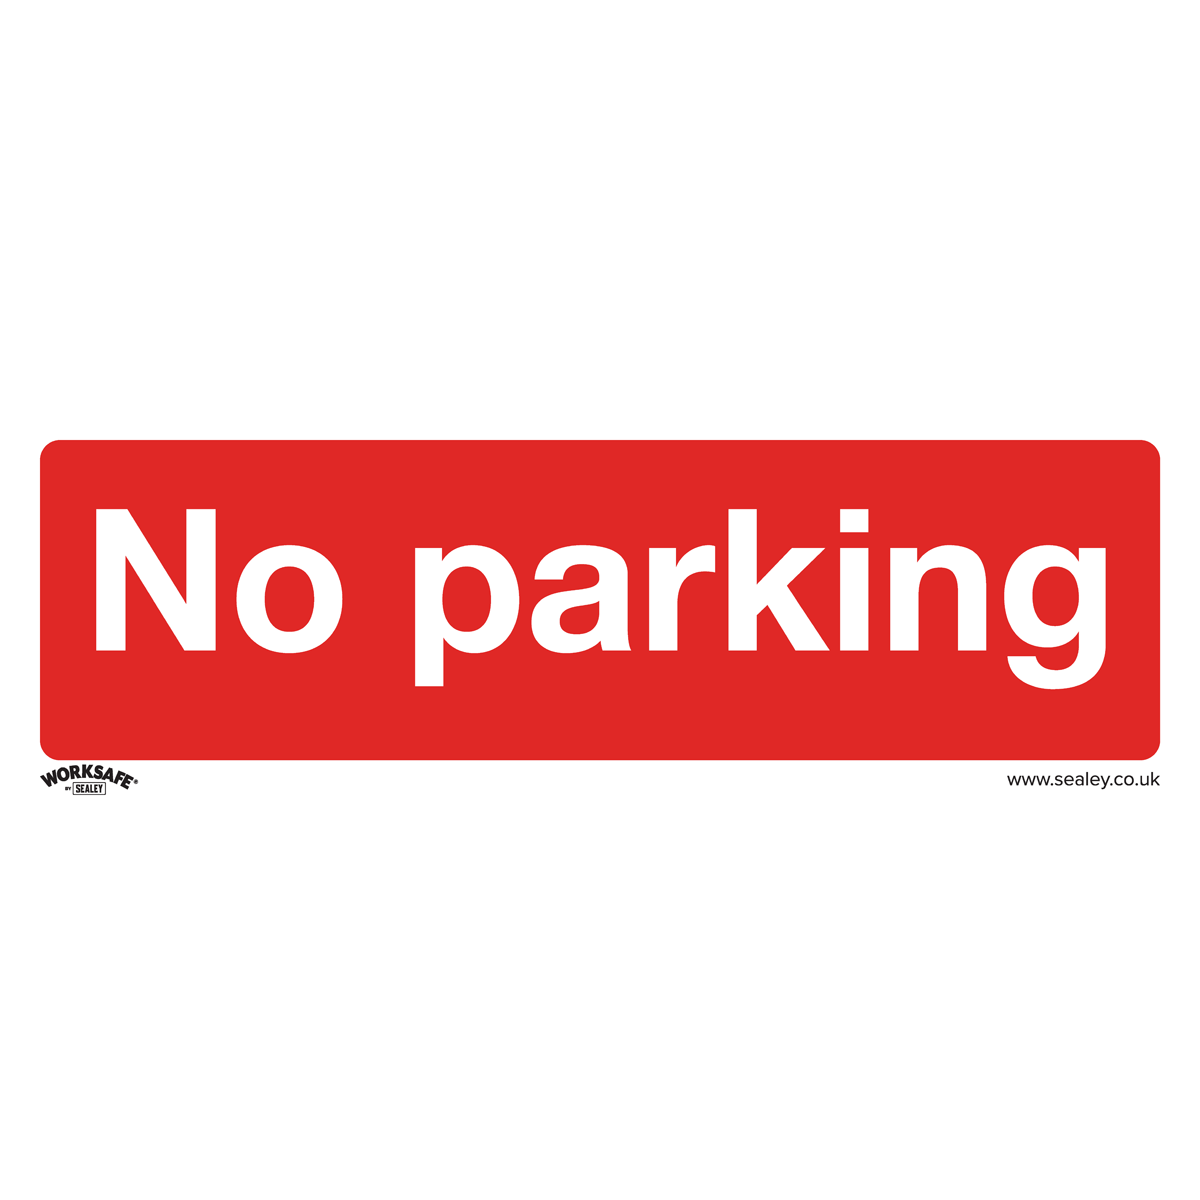 Prohibition Safety Sign - No Parking - Self-Adhesive Vinyl - Pack of 10 - SS16V10 - Farming Parts